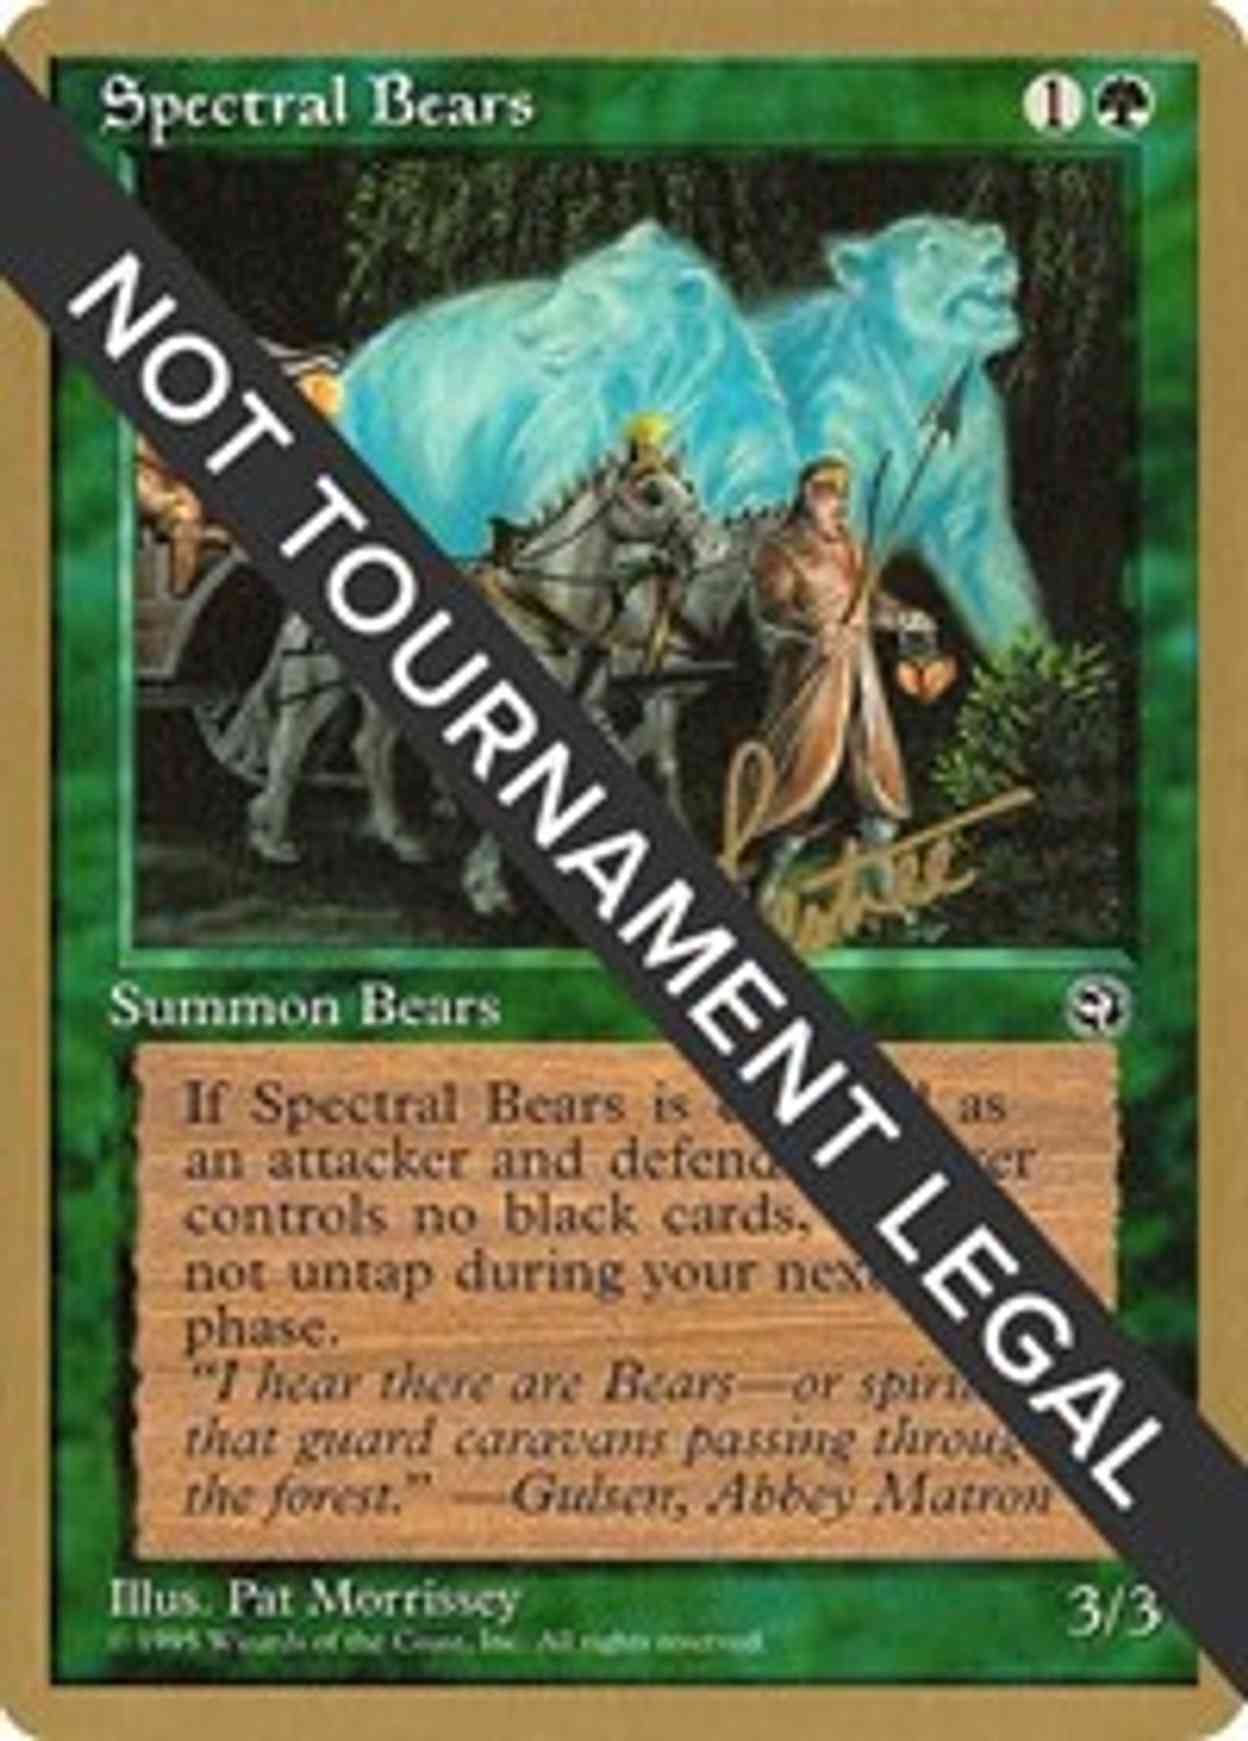 Spectral Bears - 1996 Bertrand Lestree (HML) magic card front